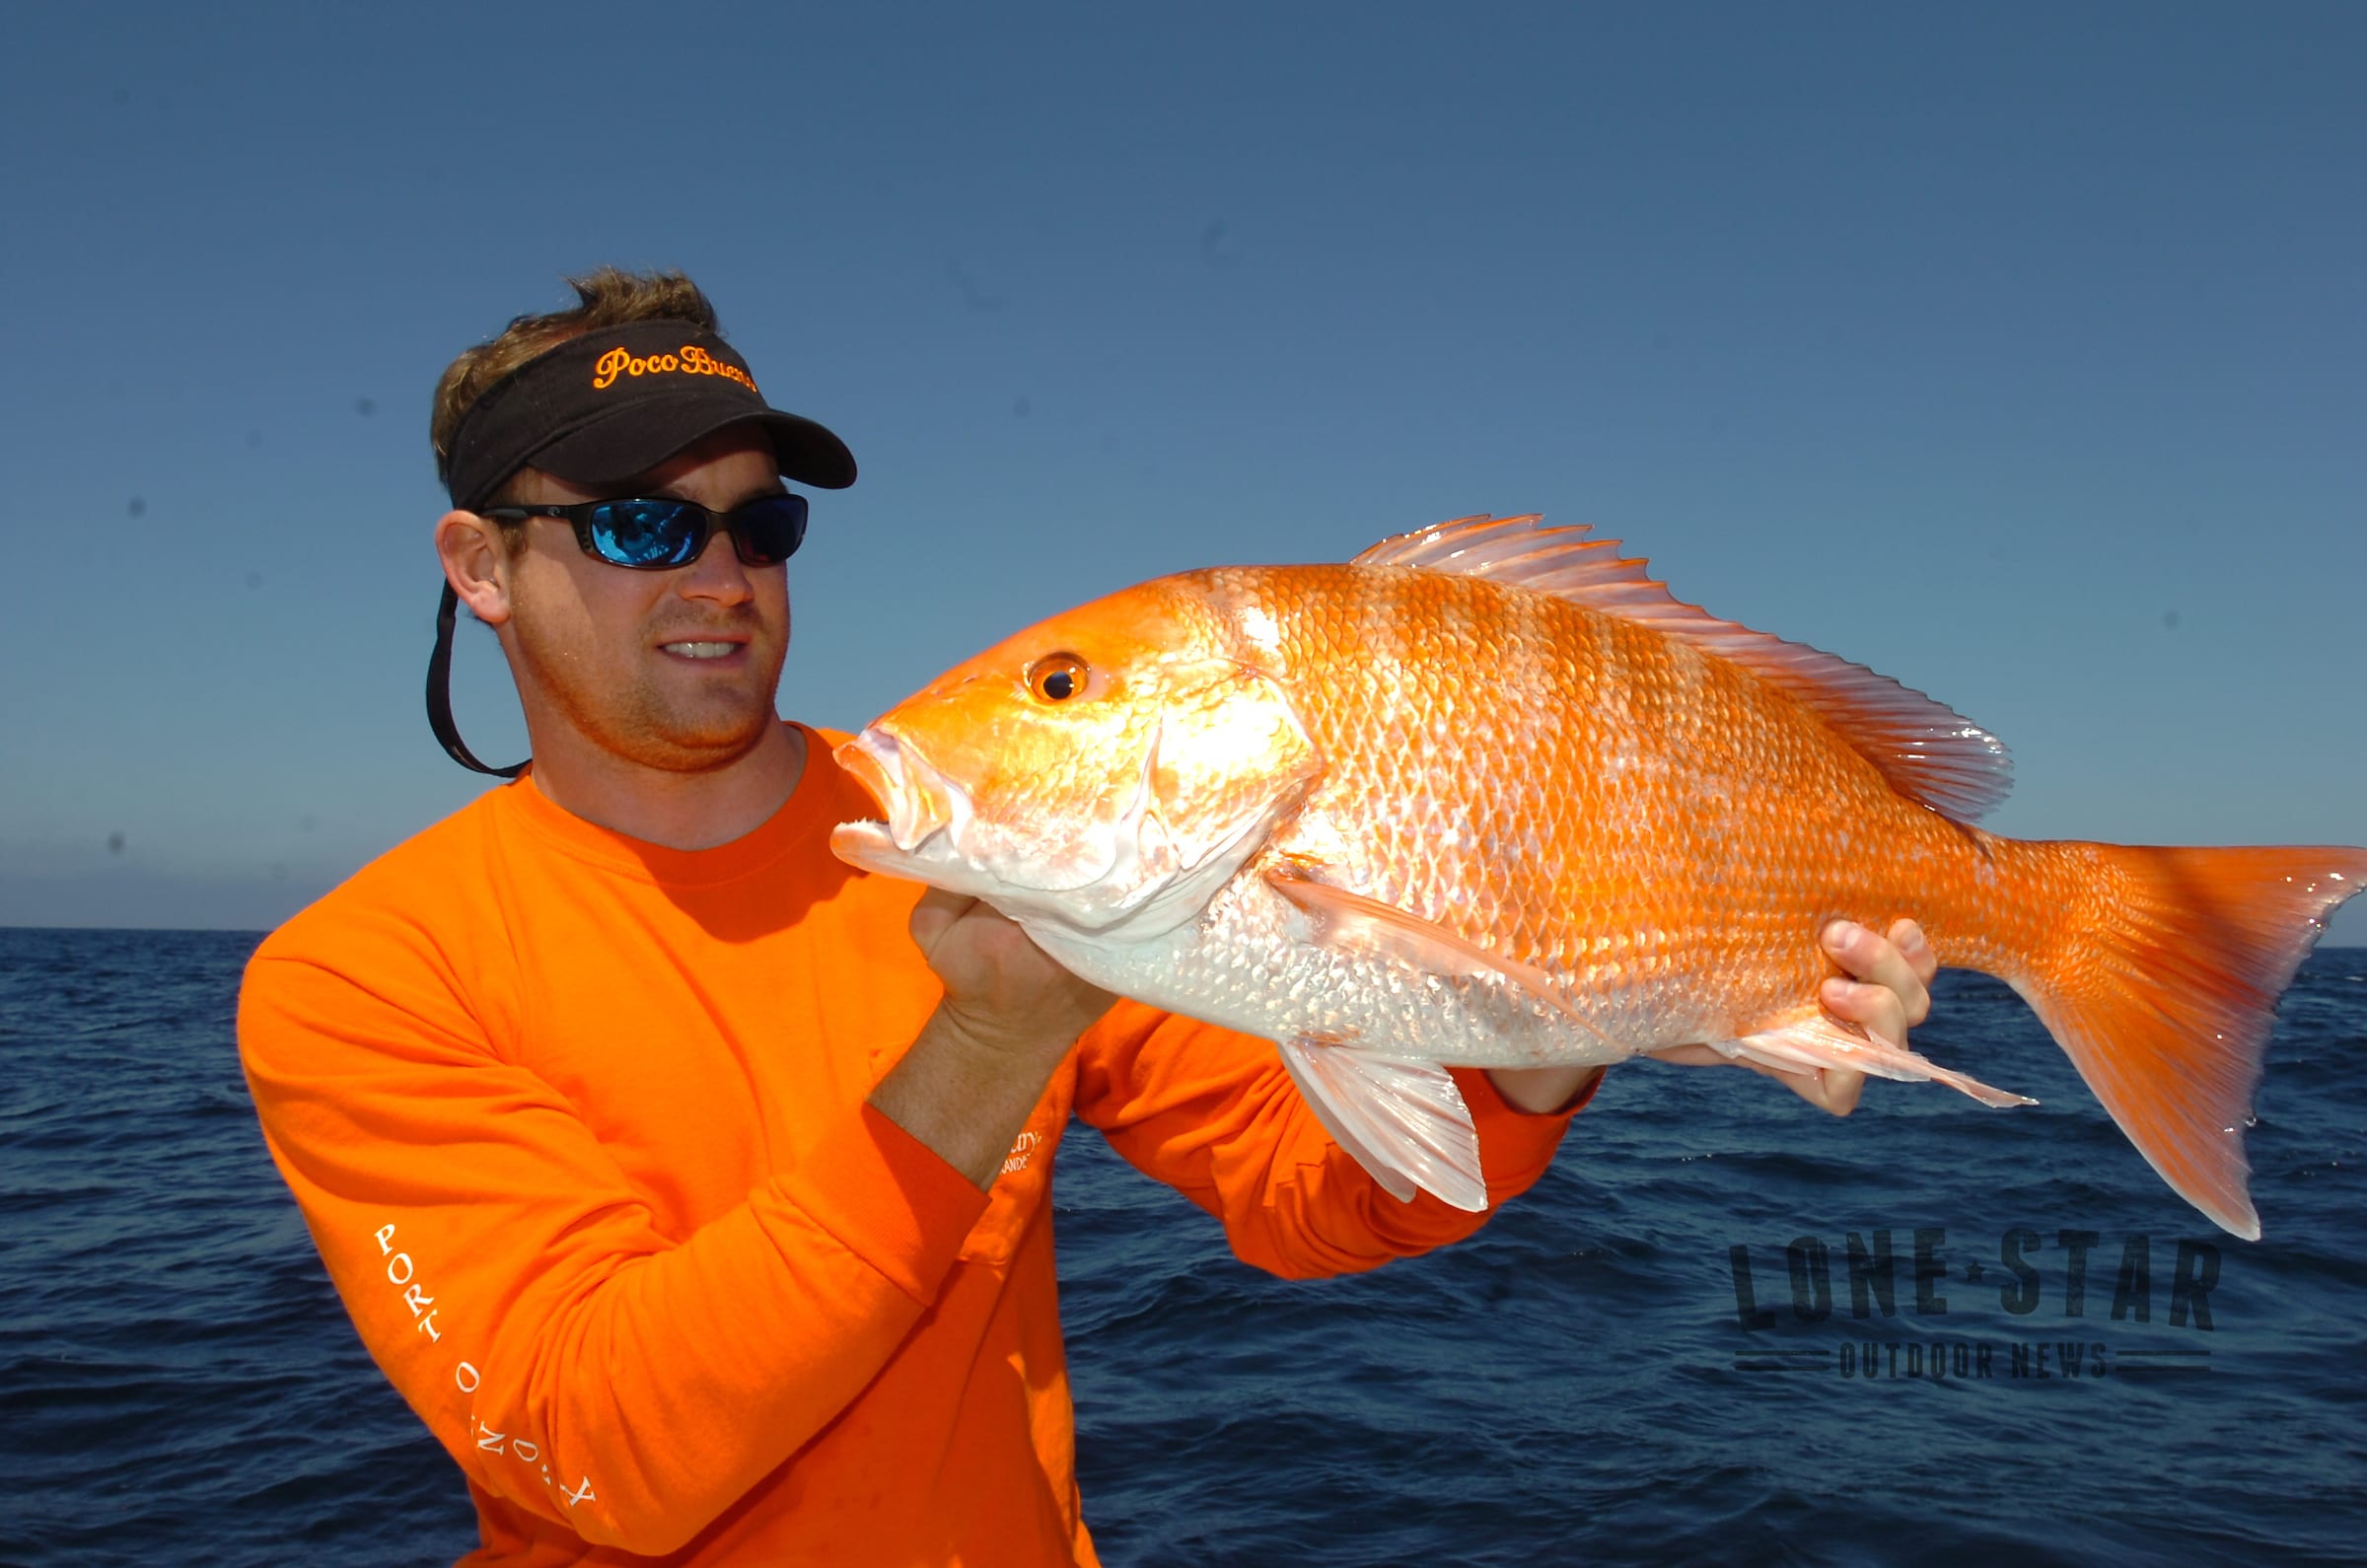 Red Snapper Fishing in Texas